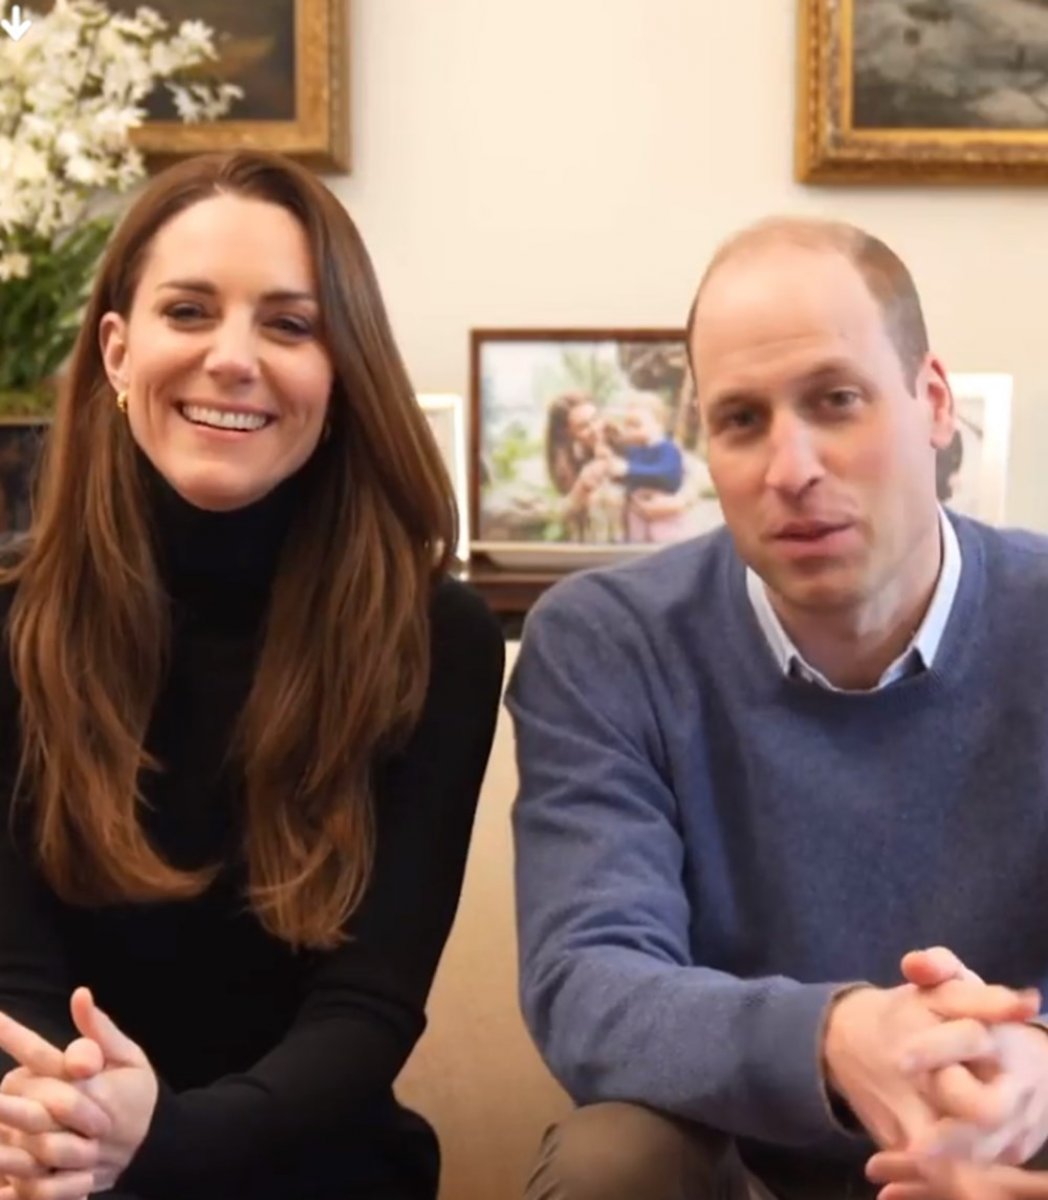 Prince William and Kate Middleton: We're on YouTube #2